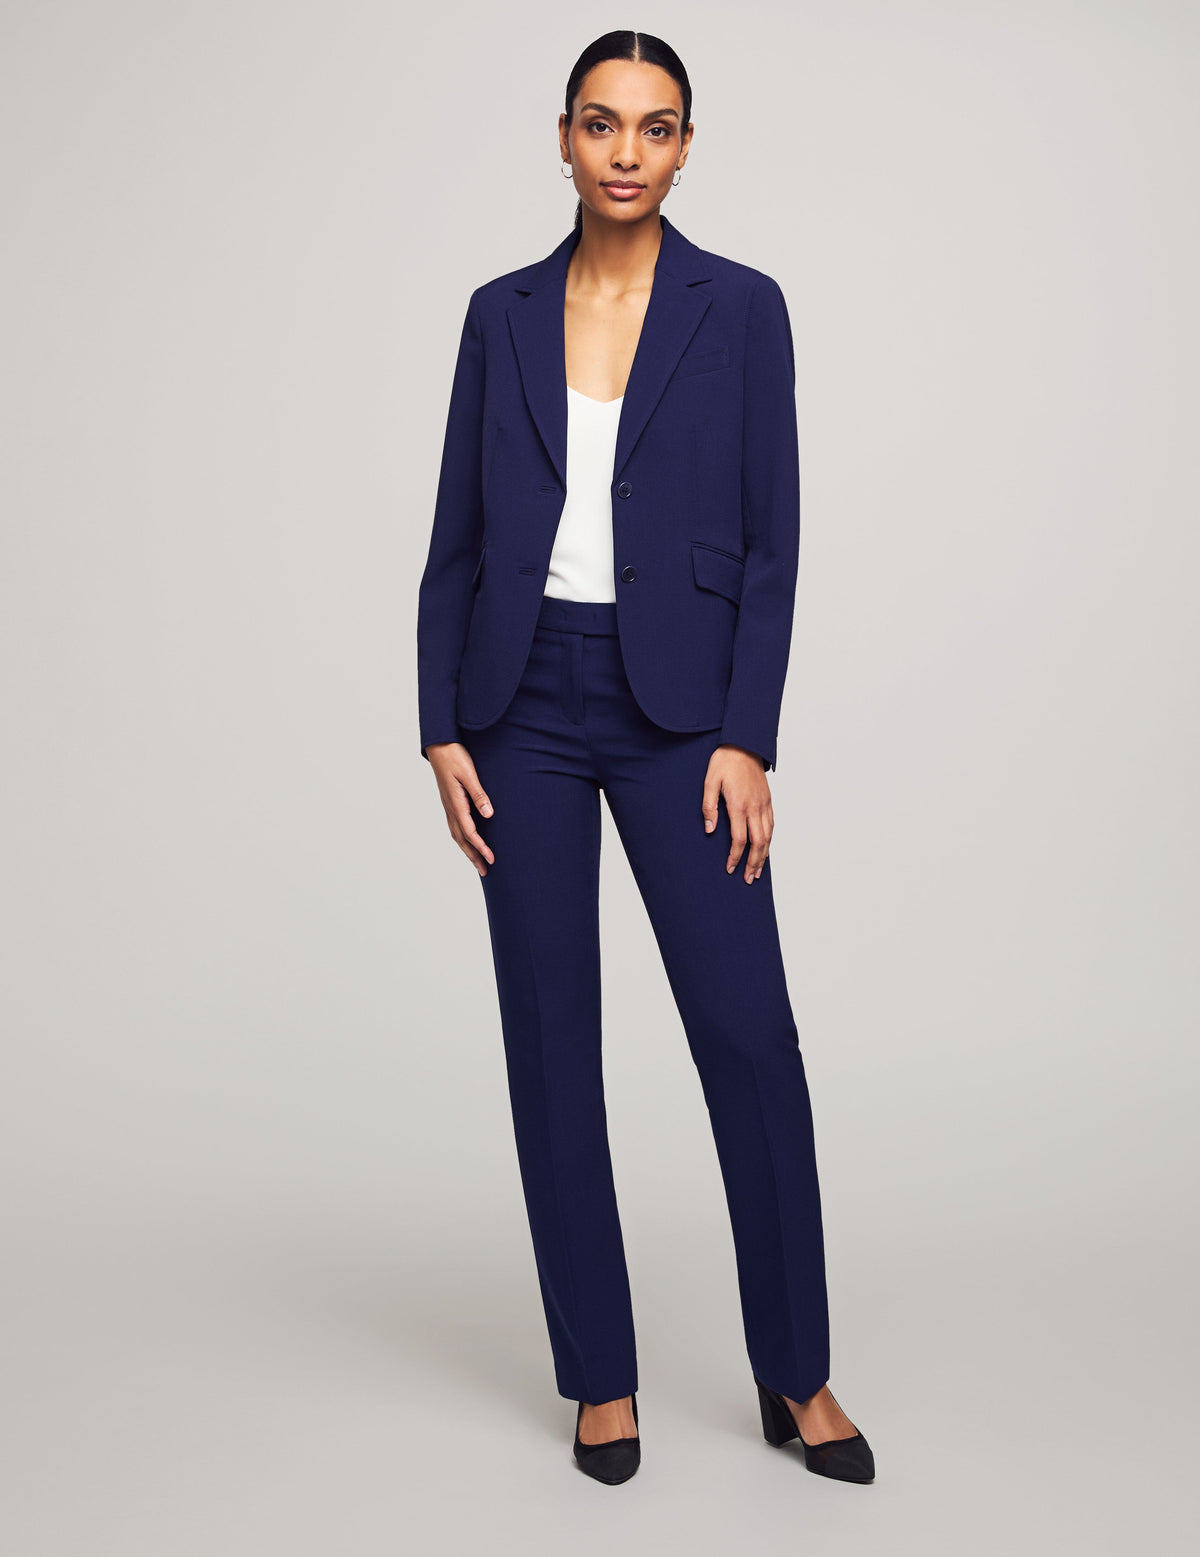 Anne Klein  Executive Collection 3-Pc. Pants and Skirt Suit Set